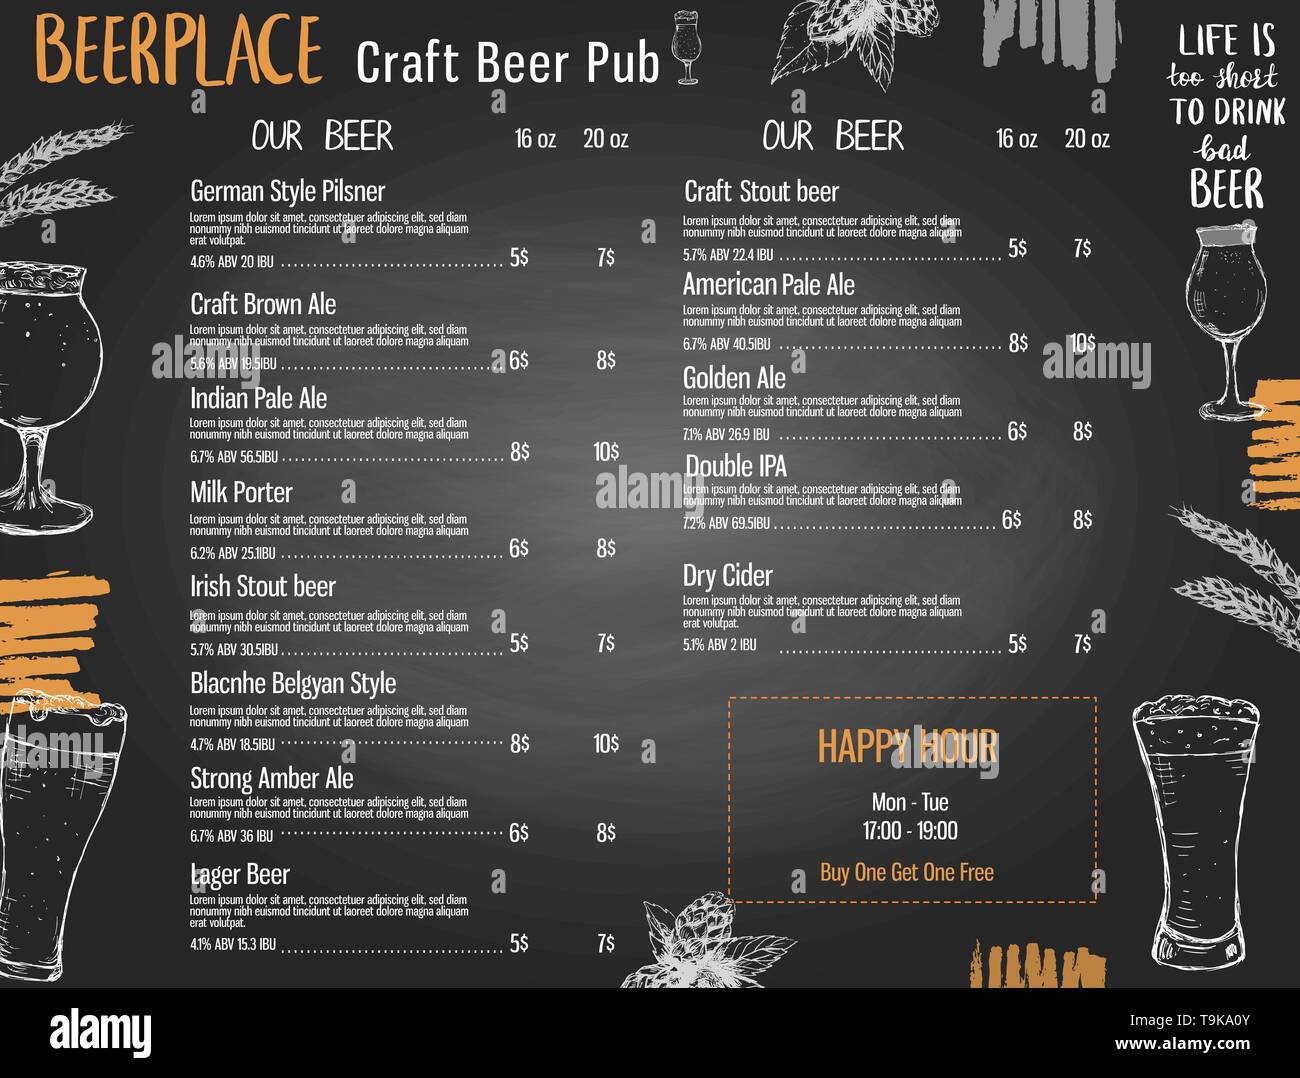 Beer menu template for pub or brewery with hand drawn elements Stock Vector